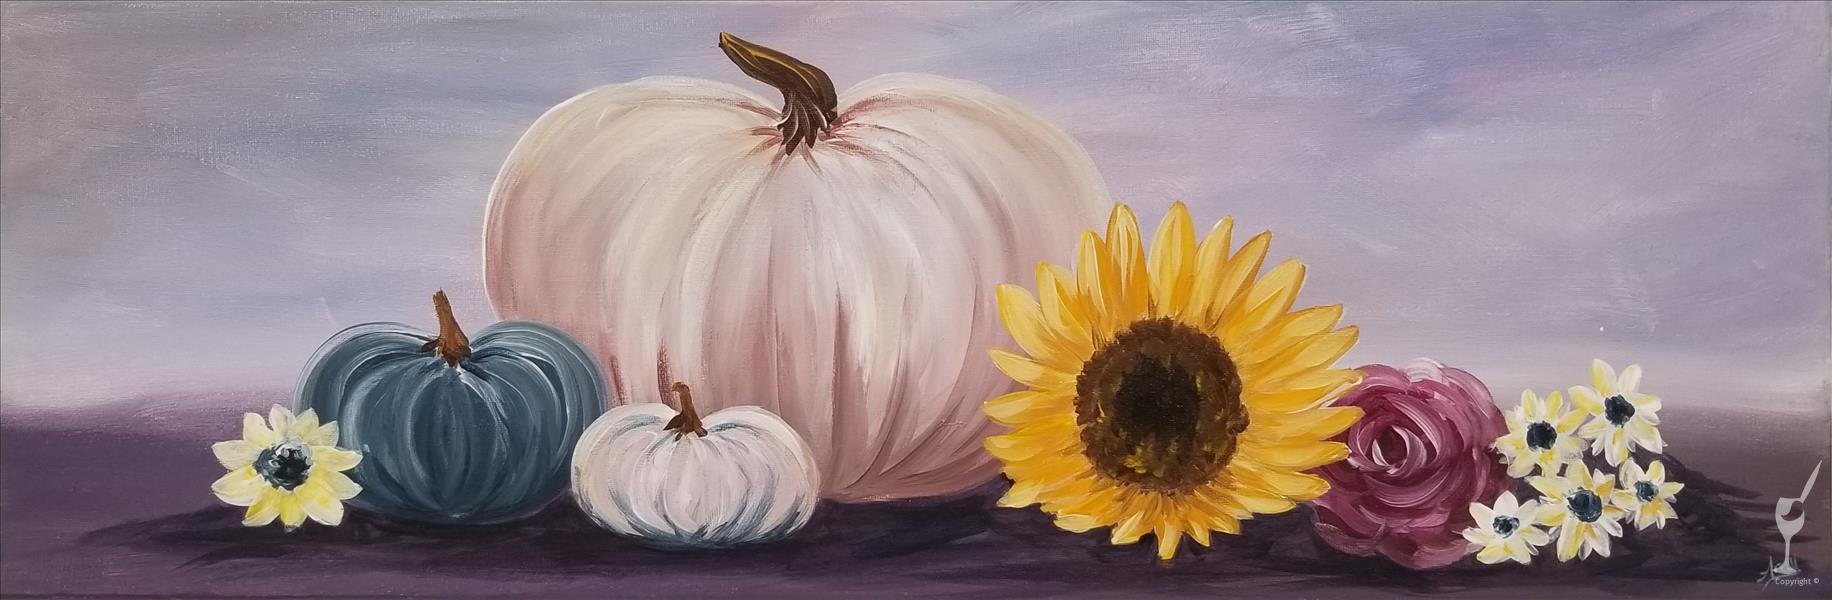 How to Paint Pumpkins and Sunflowers